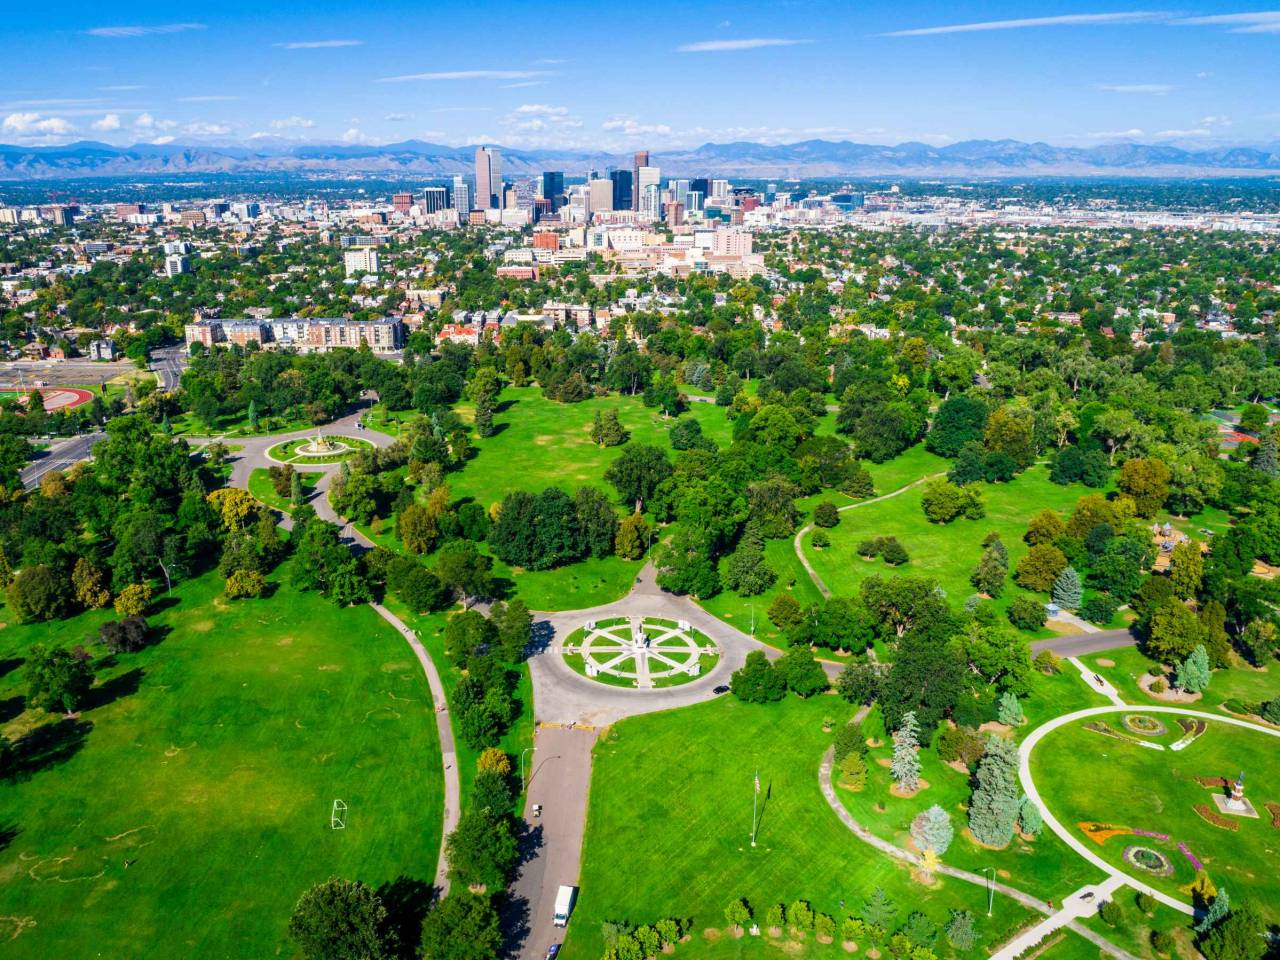 Denver Colorado green space city park aerial drone view high above the mile high city along the Rocky Mountain front range August 2018 sunny morning in the park